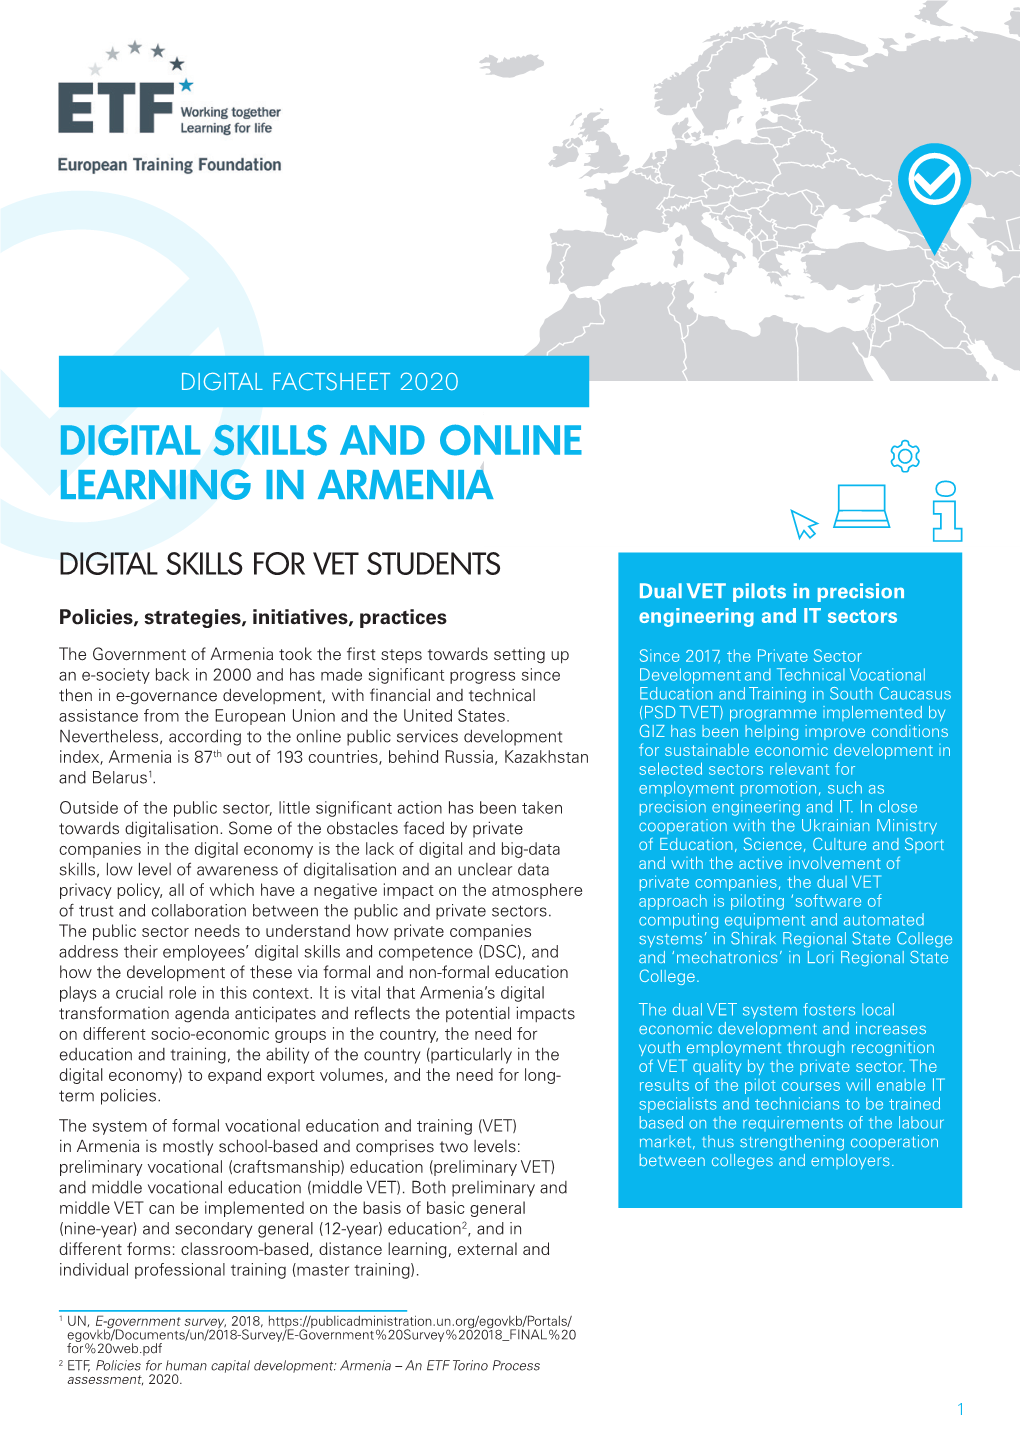 Digital Skills and Online Learning in Armenia